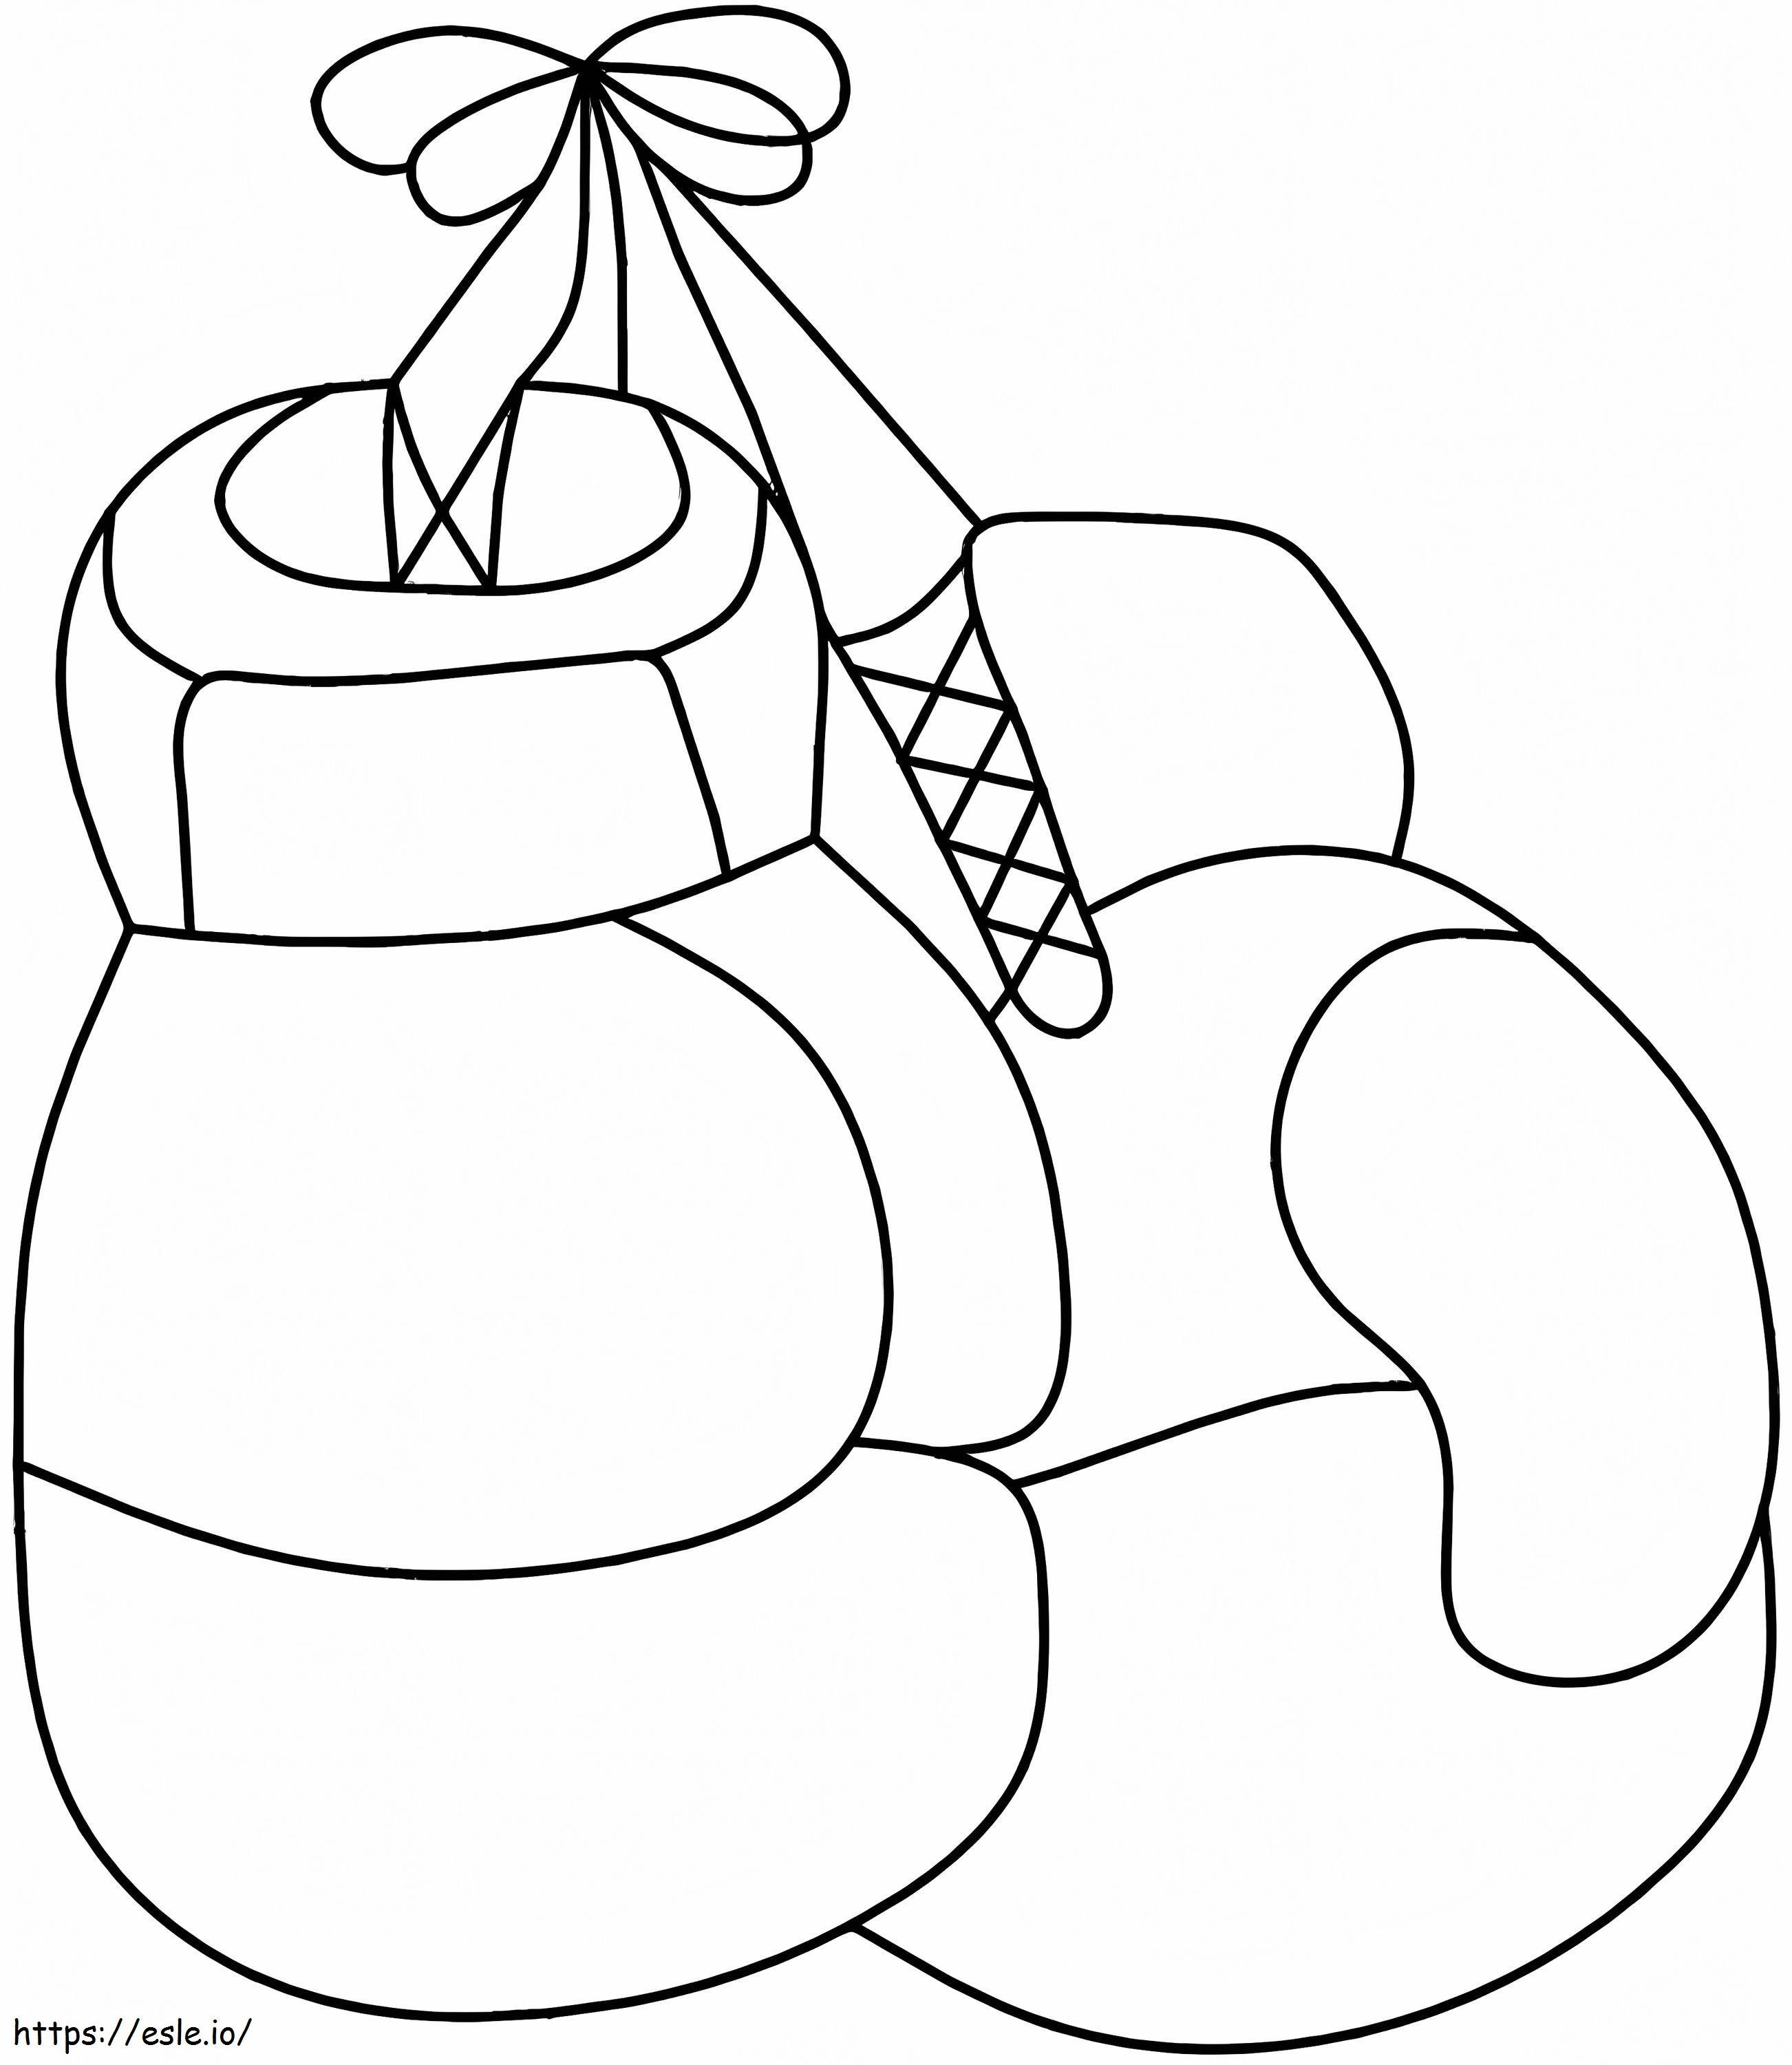 1562053049 Boxing Gloves A4 coloring page